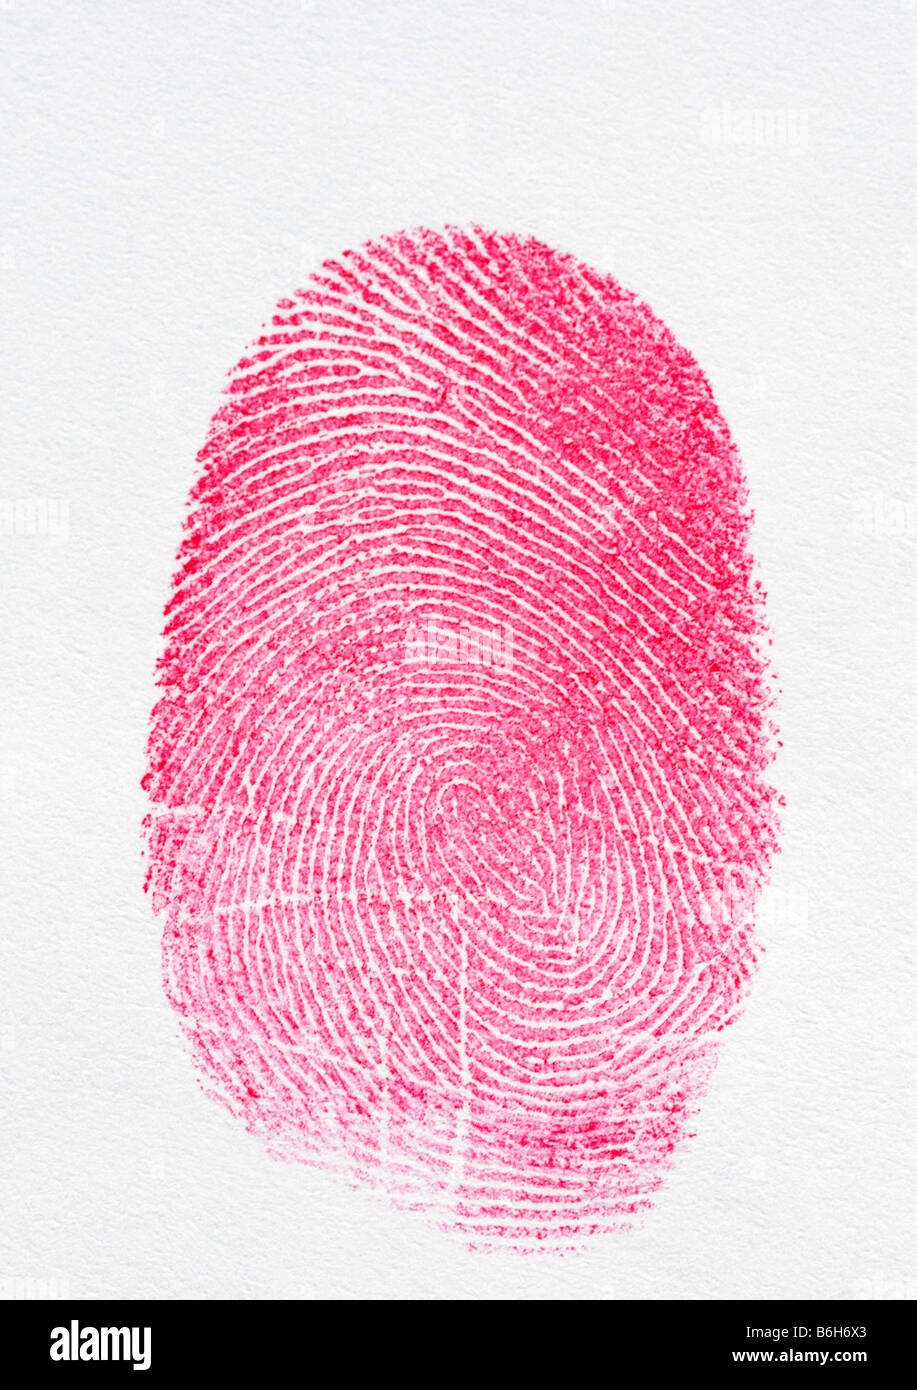 Fingerprint in red with a white background Stock Photo